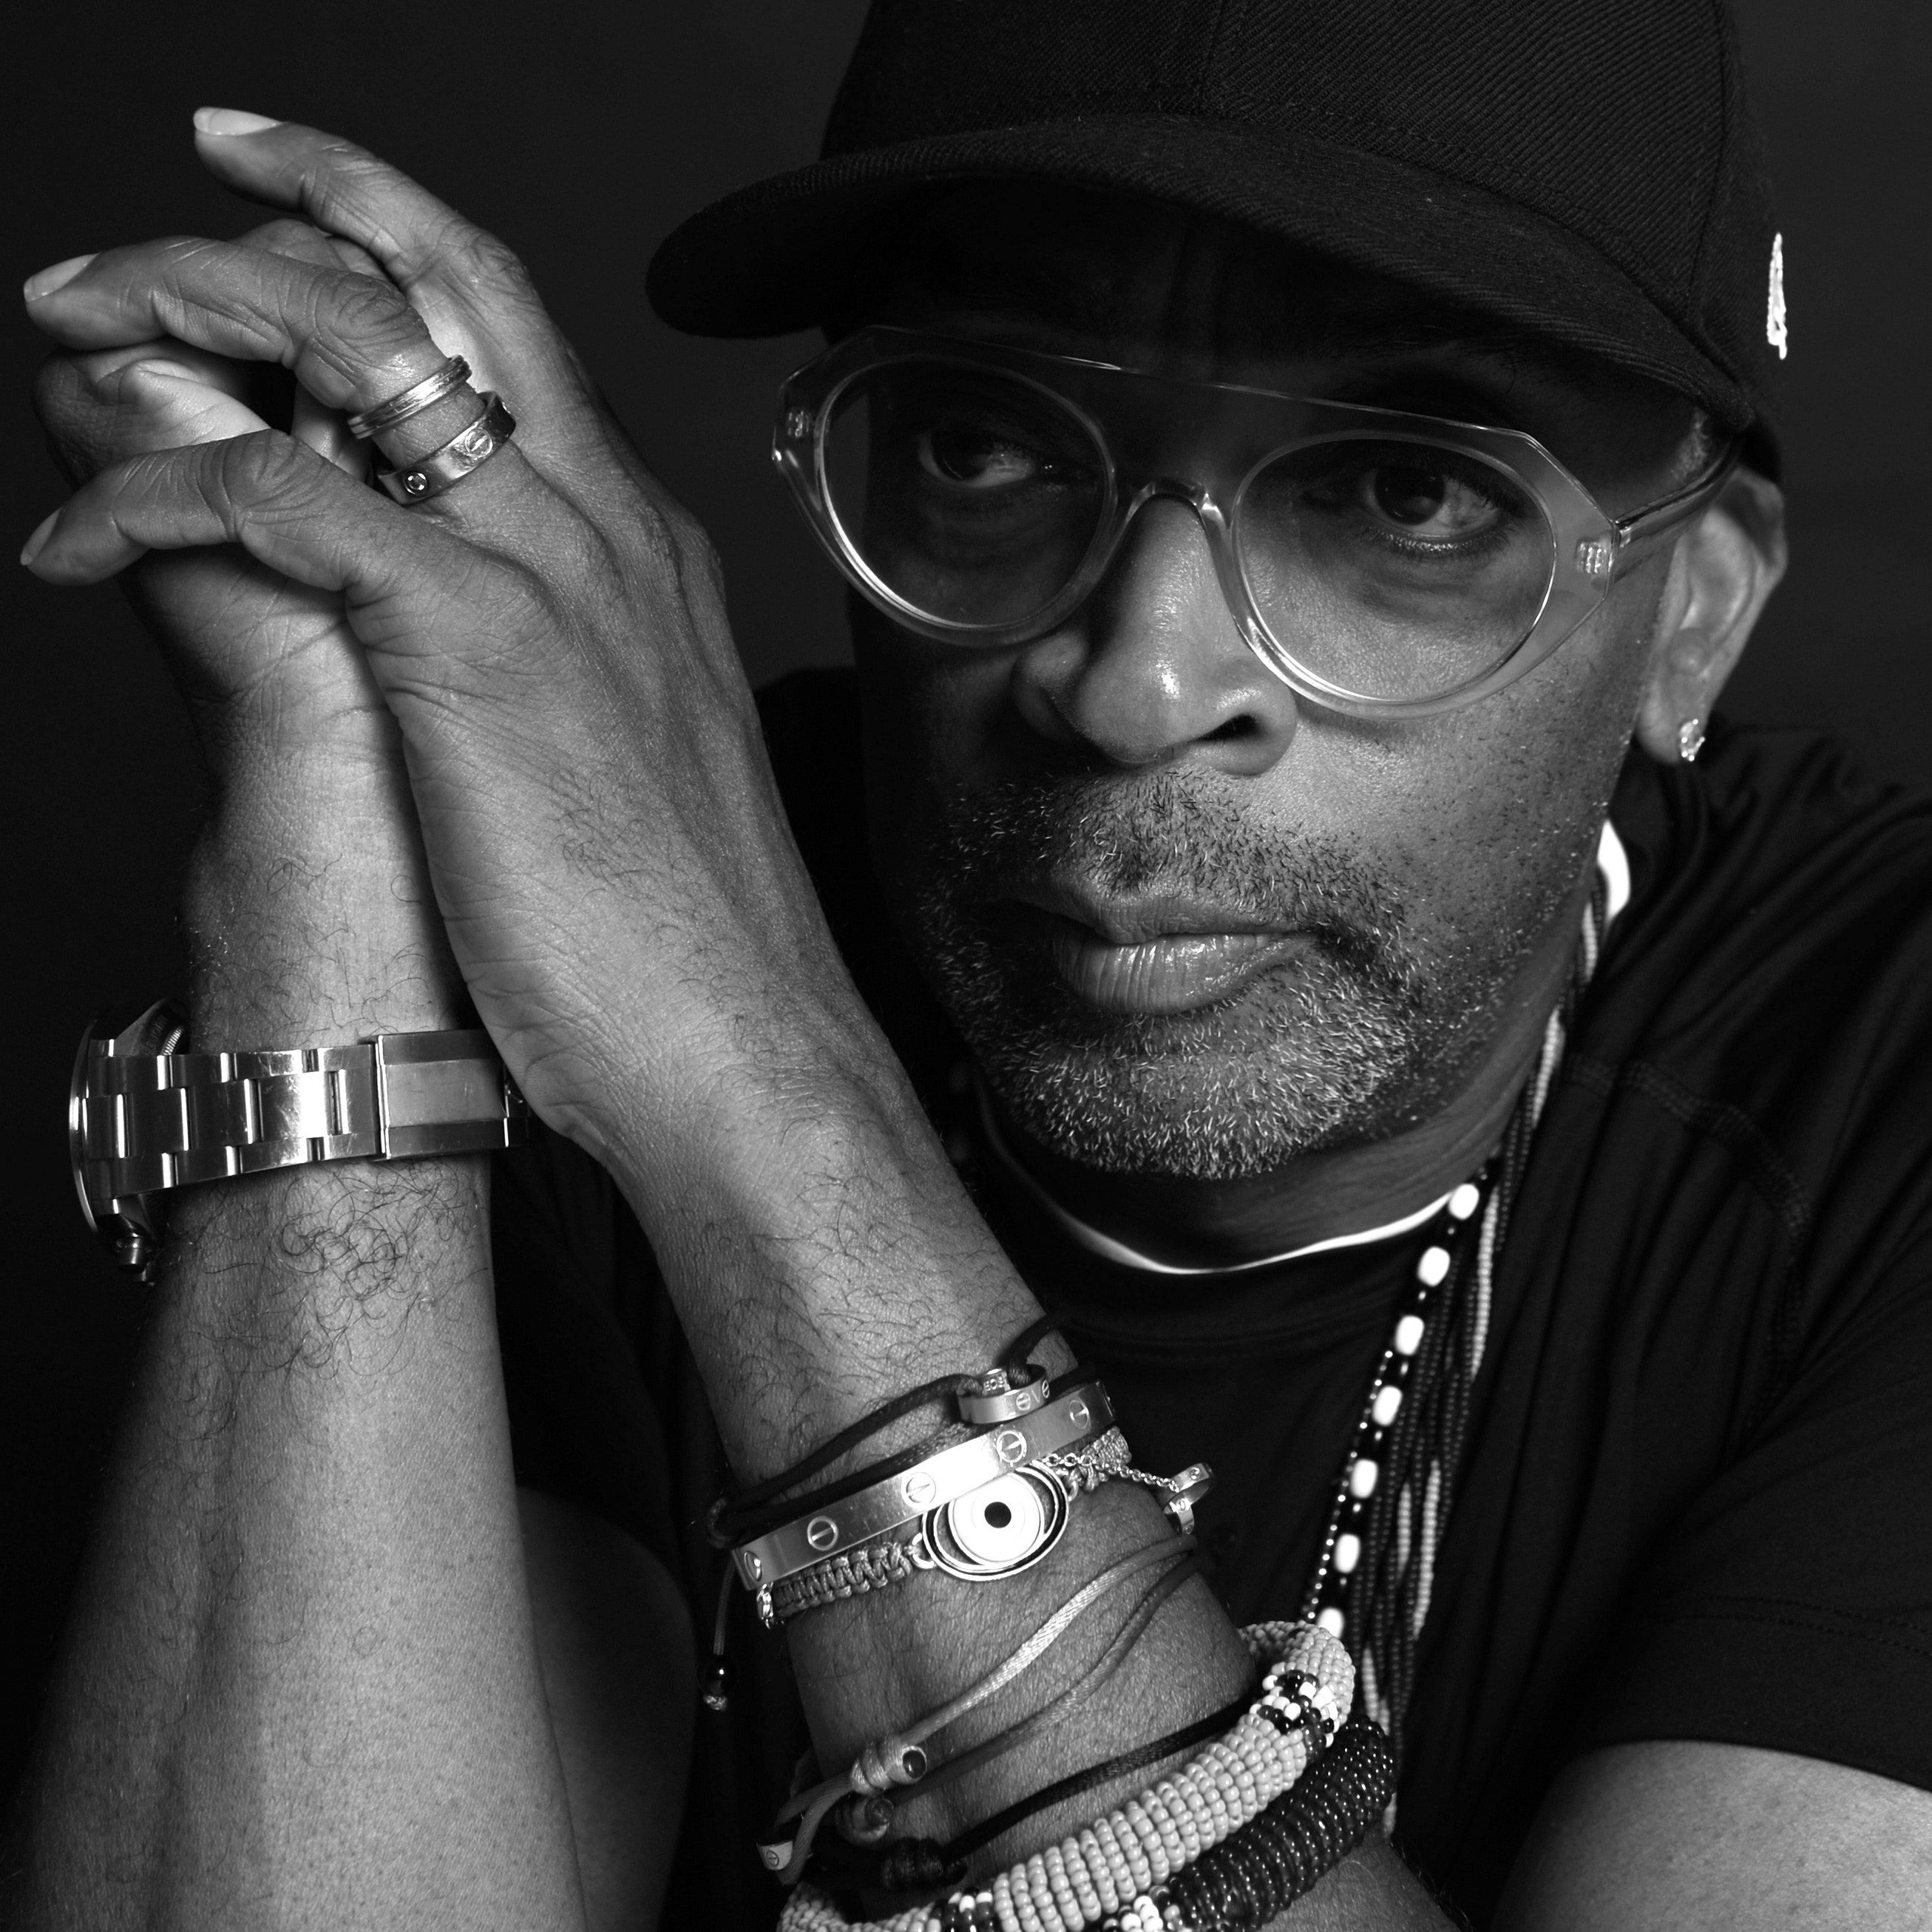 Spike Lee on George Floyd's Killing, Da 5 Bloods, and Donald